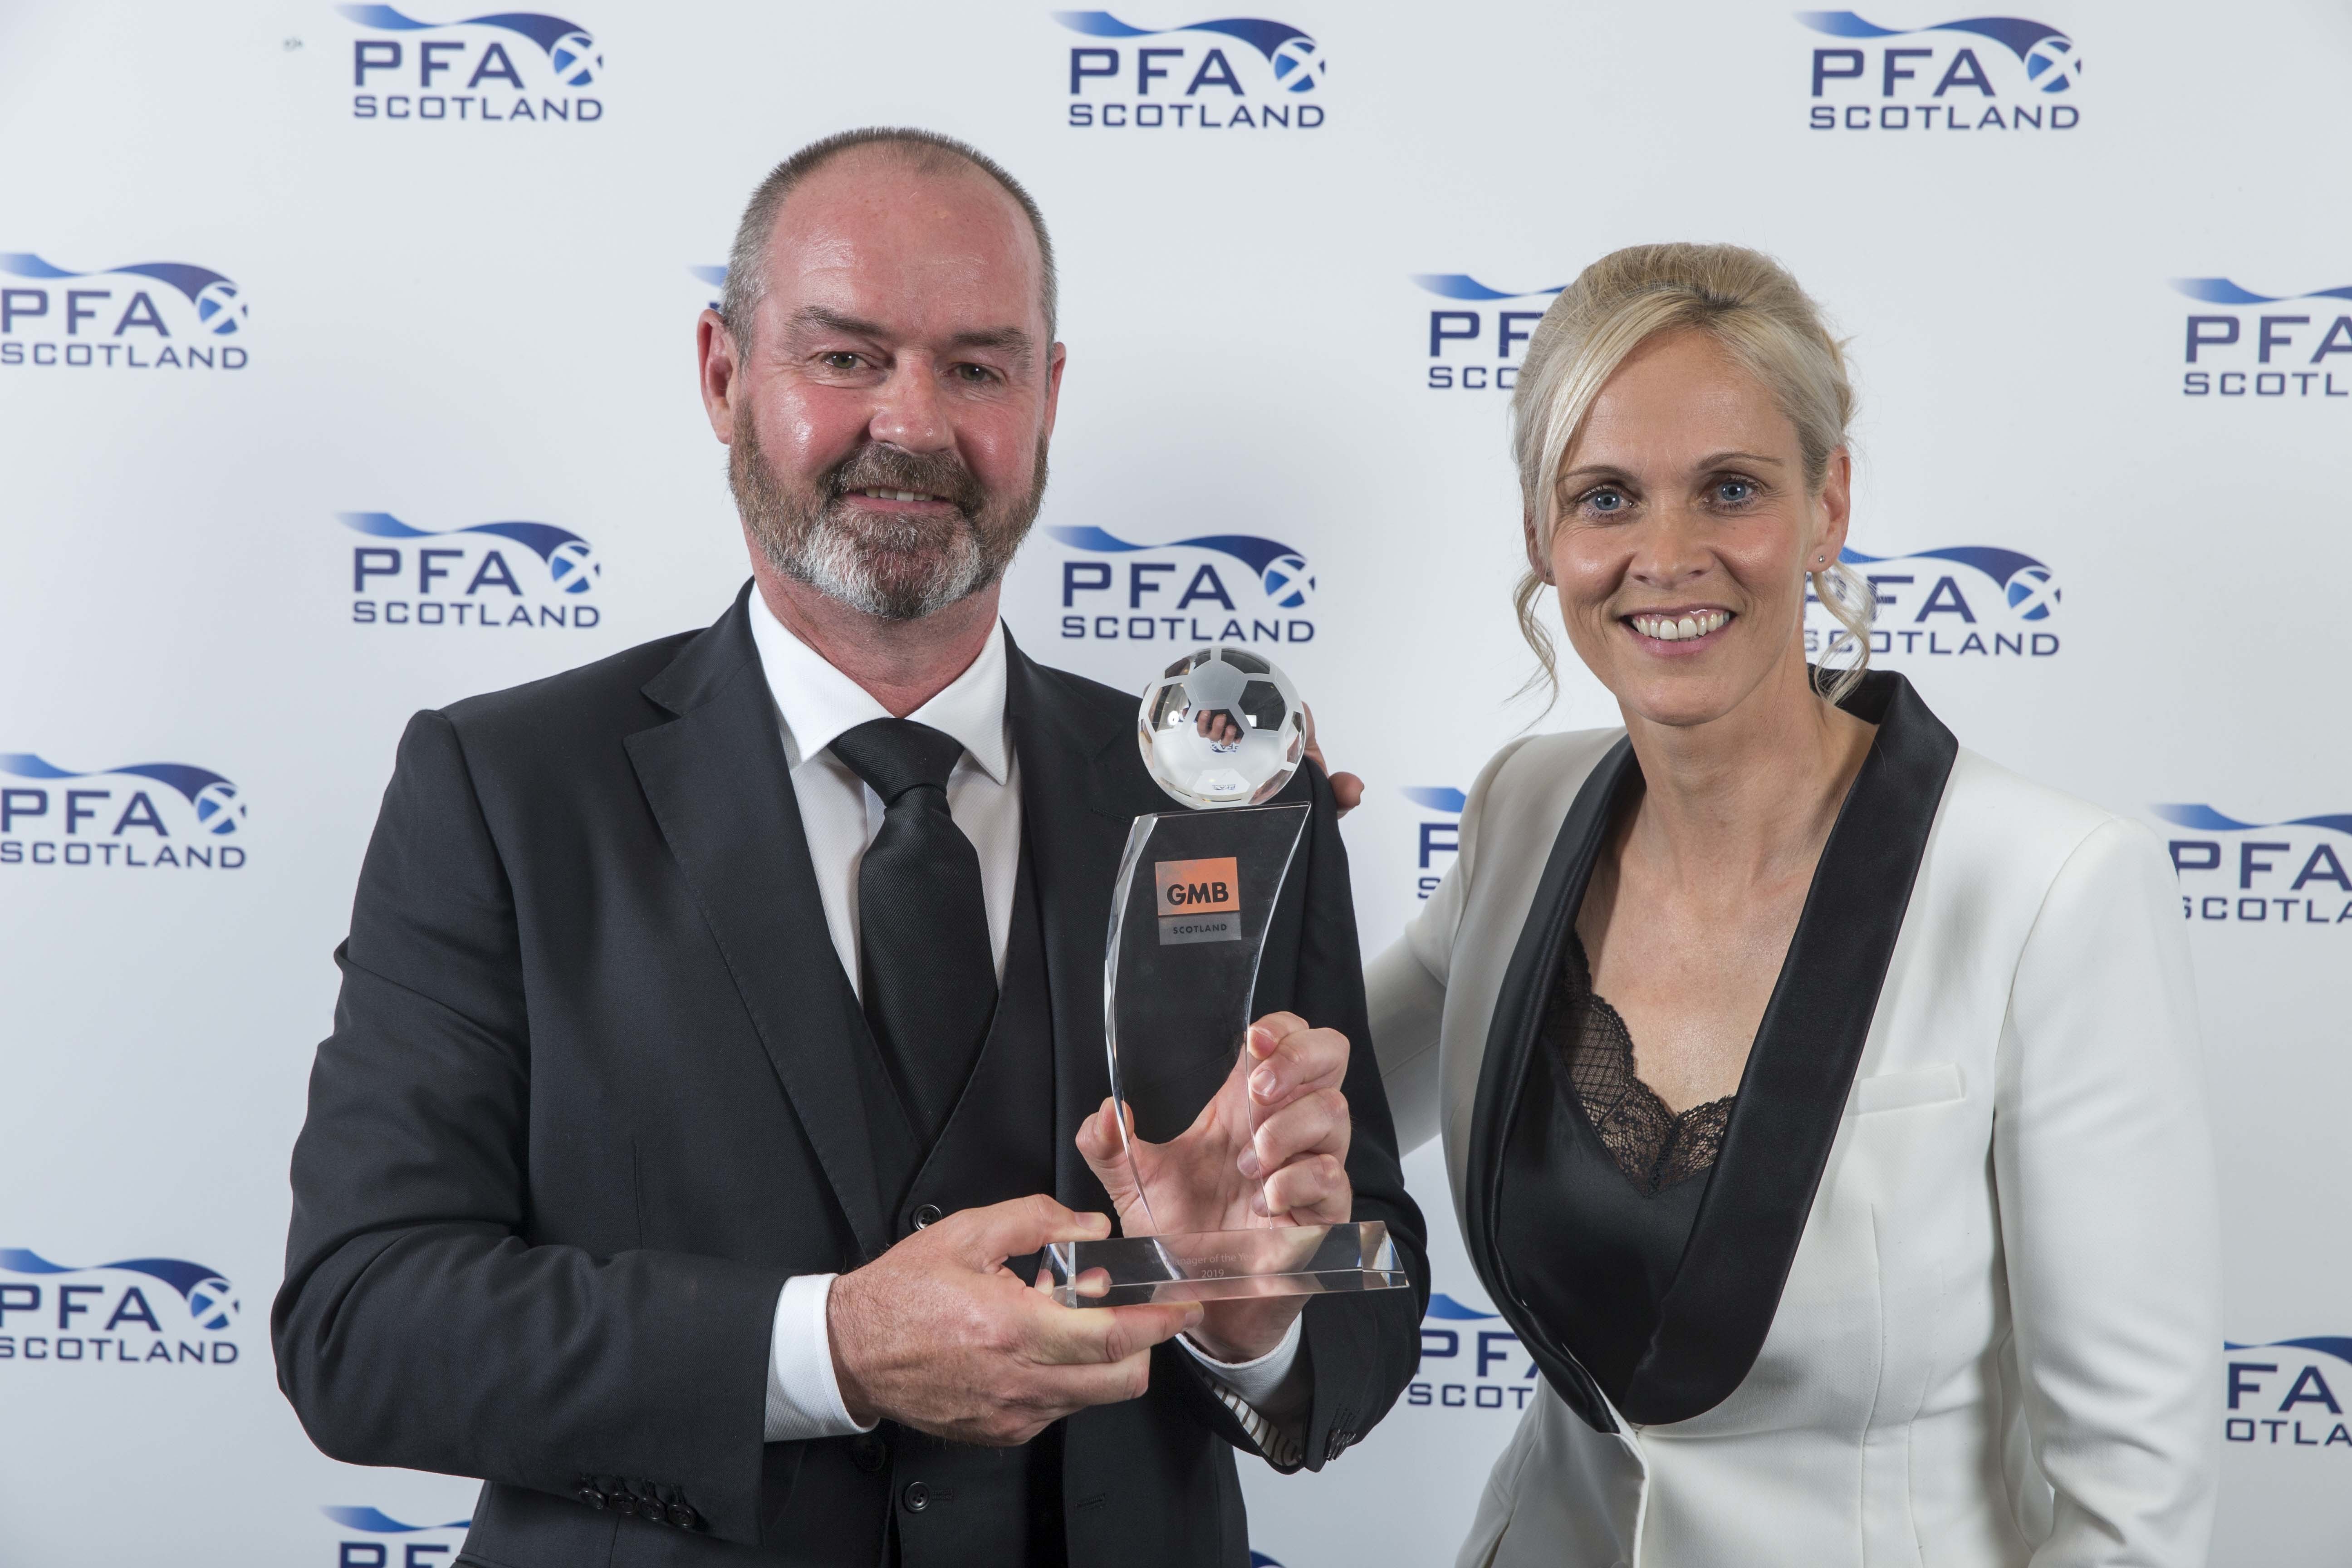 Manager of the year Kilmarnock's Steve Clarke presented by Shelley Kerr during PFA Scotland Player of the Year Awards at Glasgow Hilton.